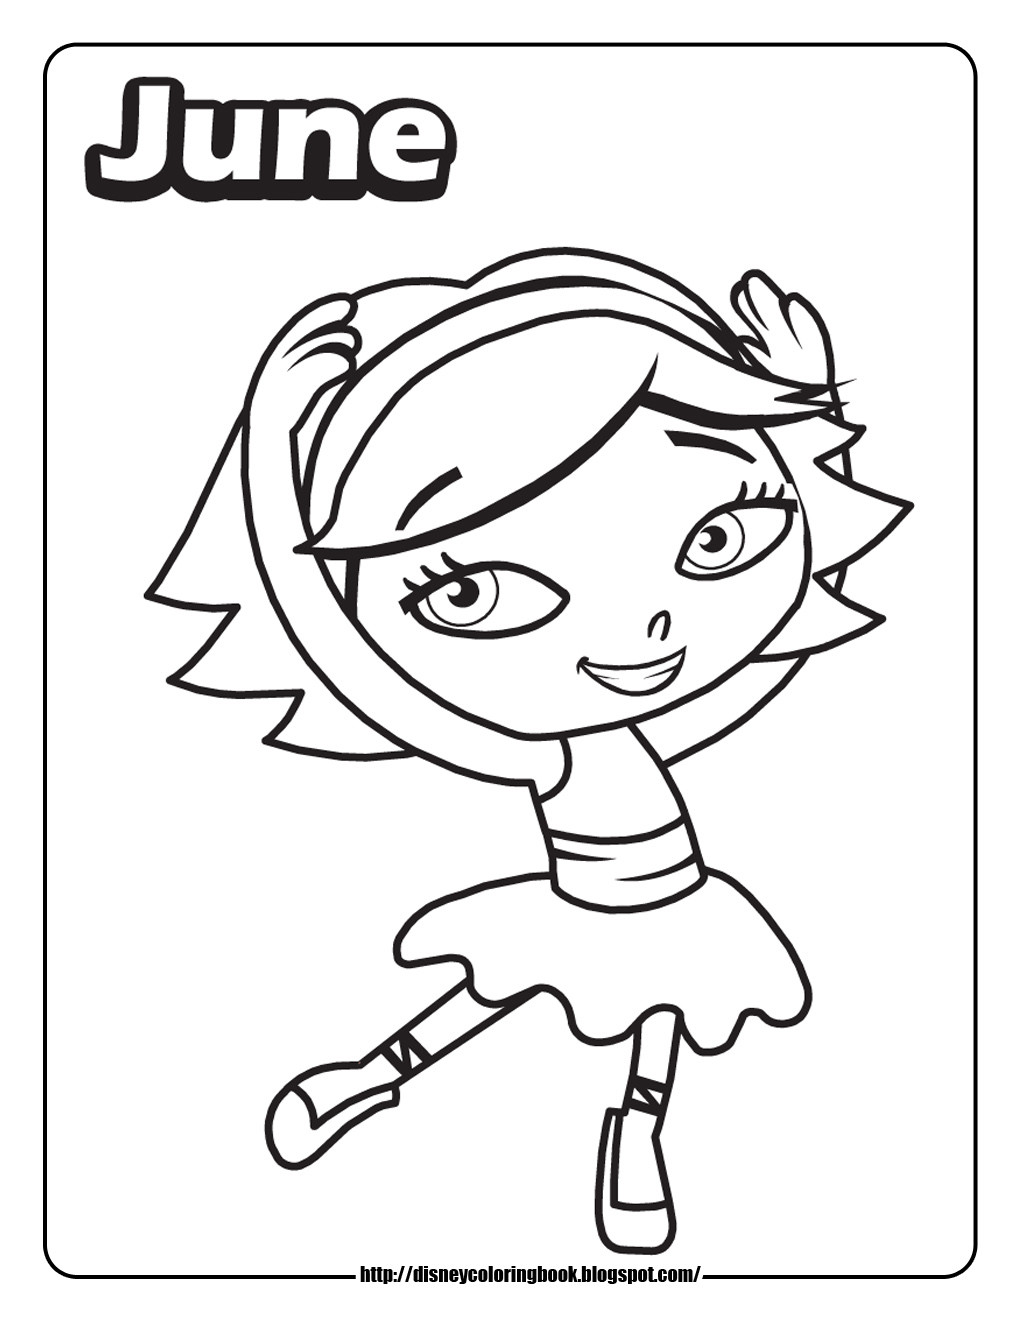 June Coloring Pages
 Little Einsteins 1 Free Disney Coloring Sheets